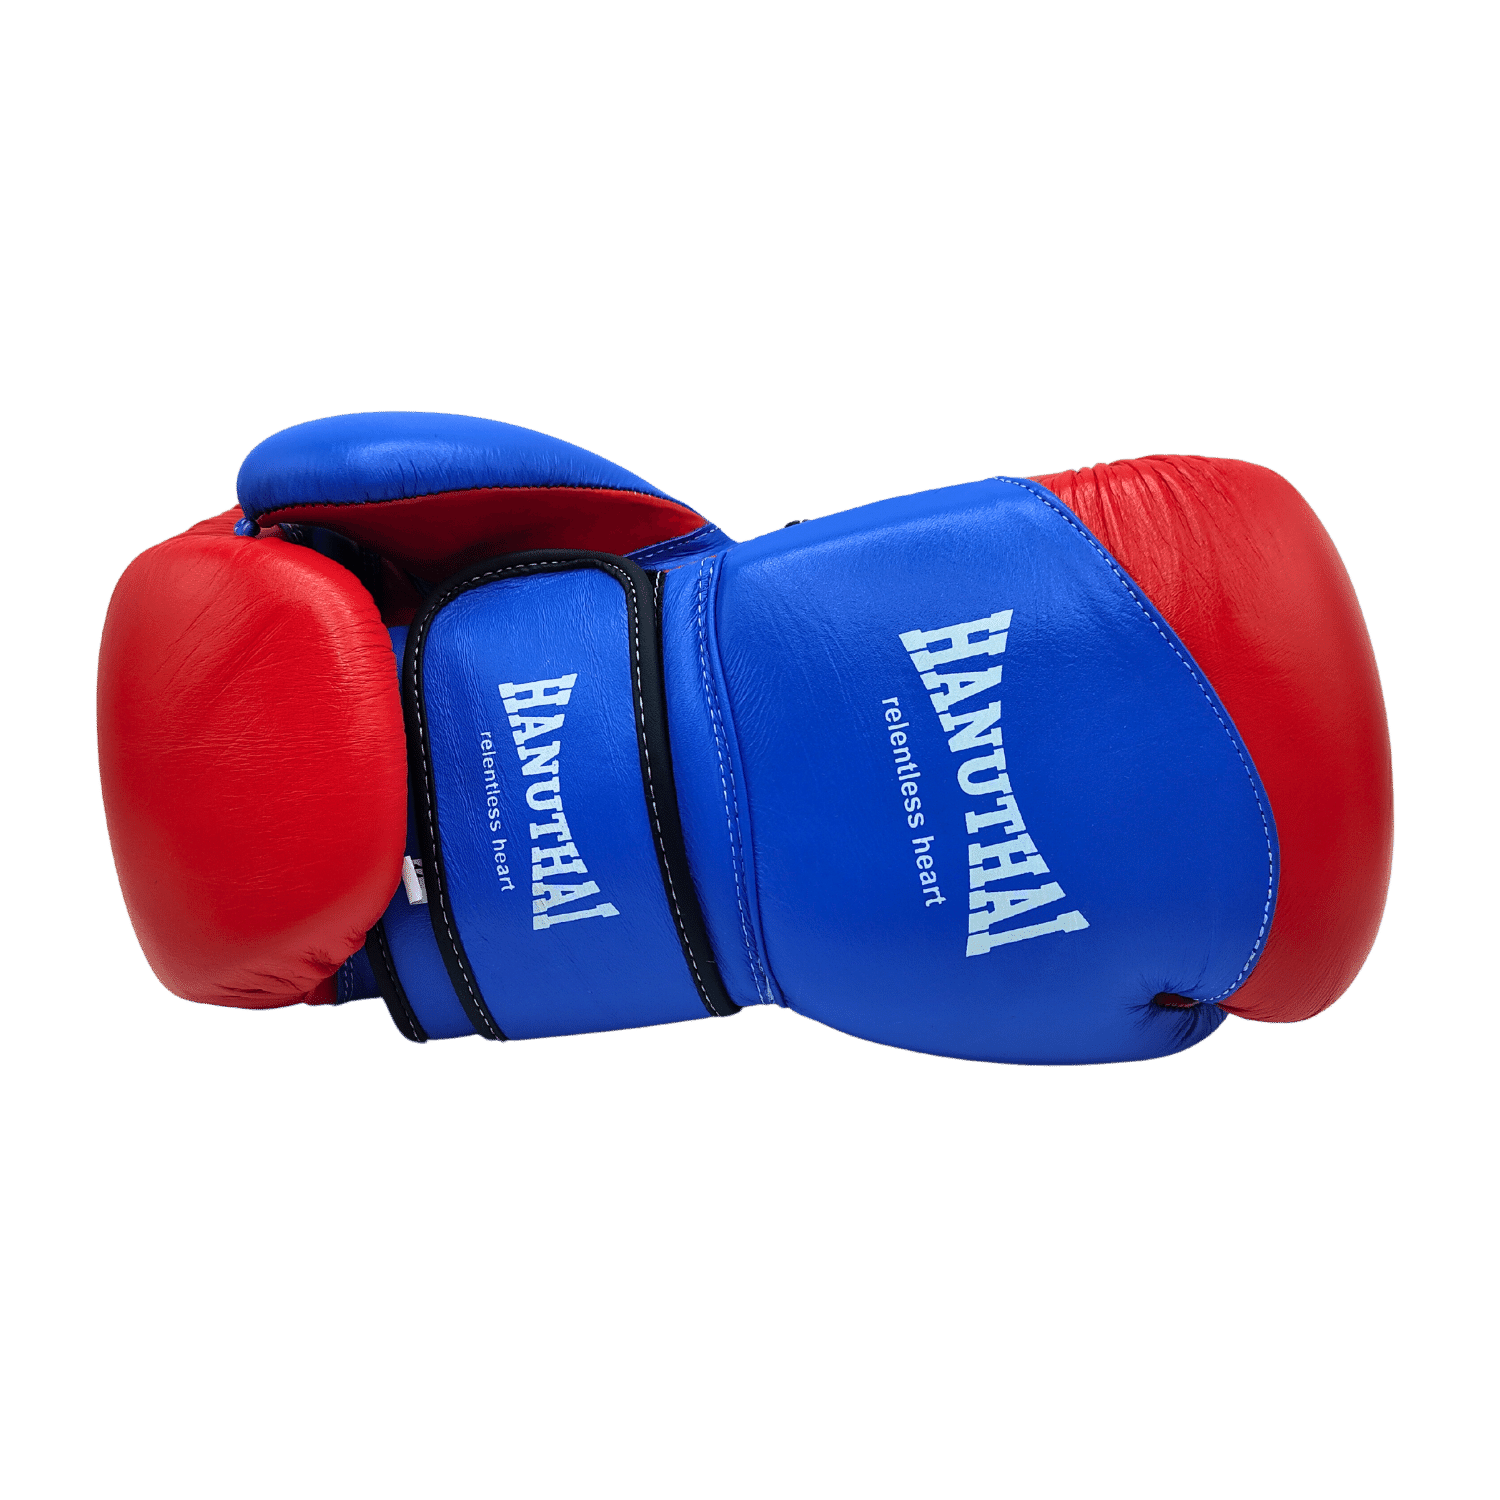 A pair of blue and red Hanuthai Muay Thai Boxing Gloves positioned against a green background.